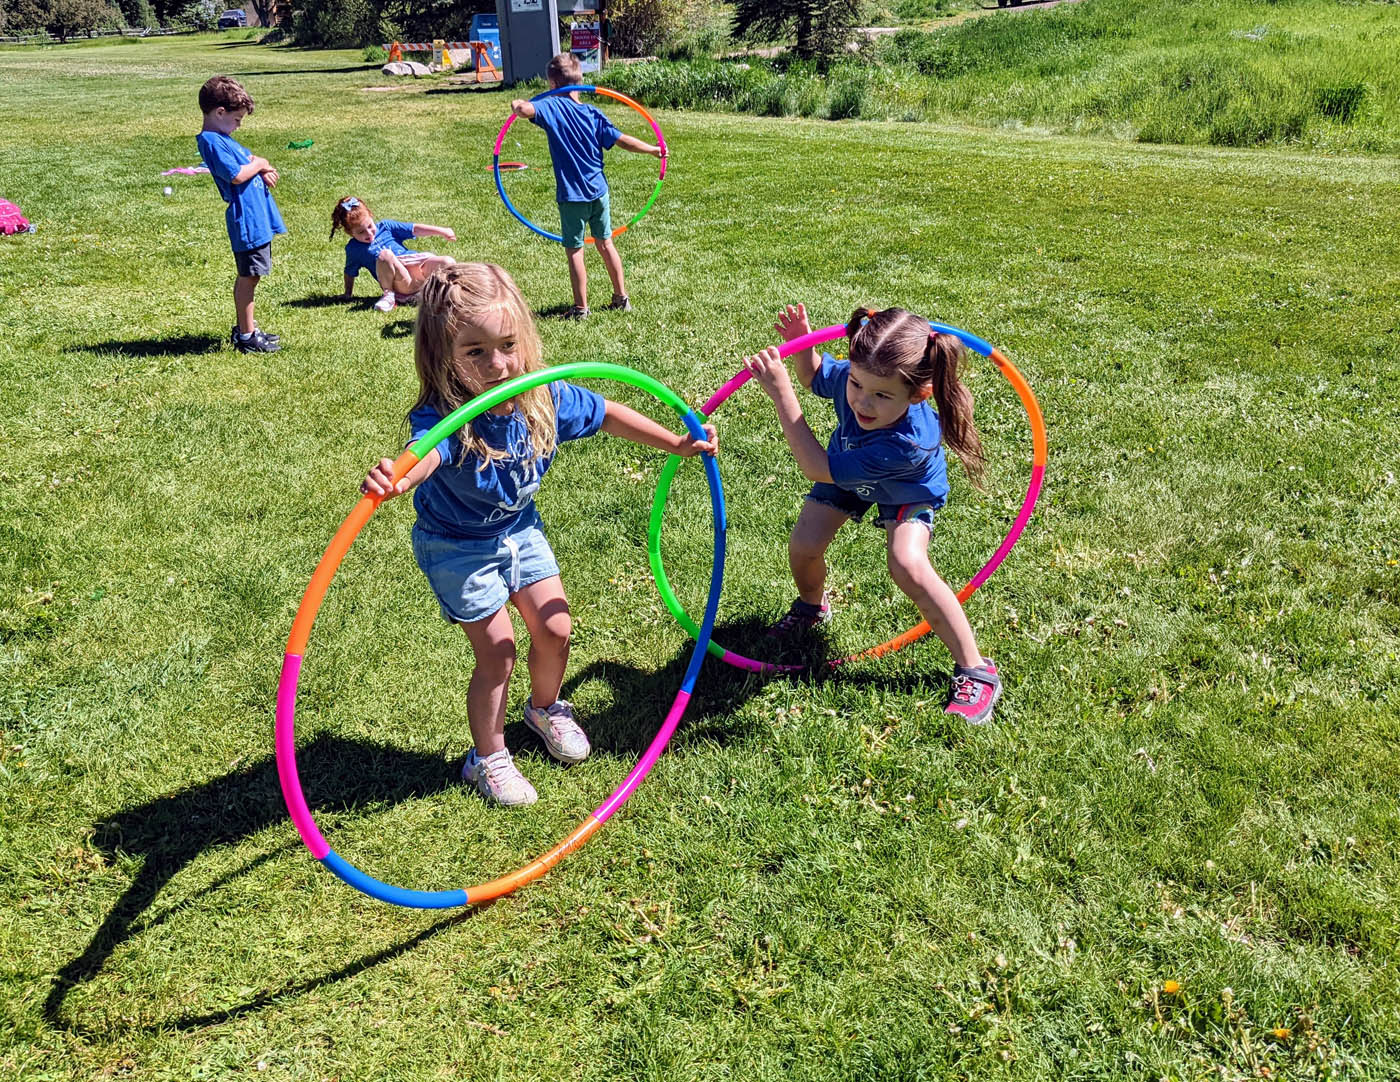 A group of children playing outside - see more summer activity ideas from Kids Garden!